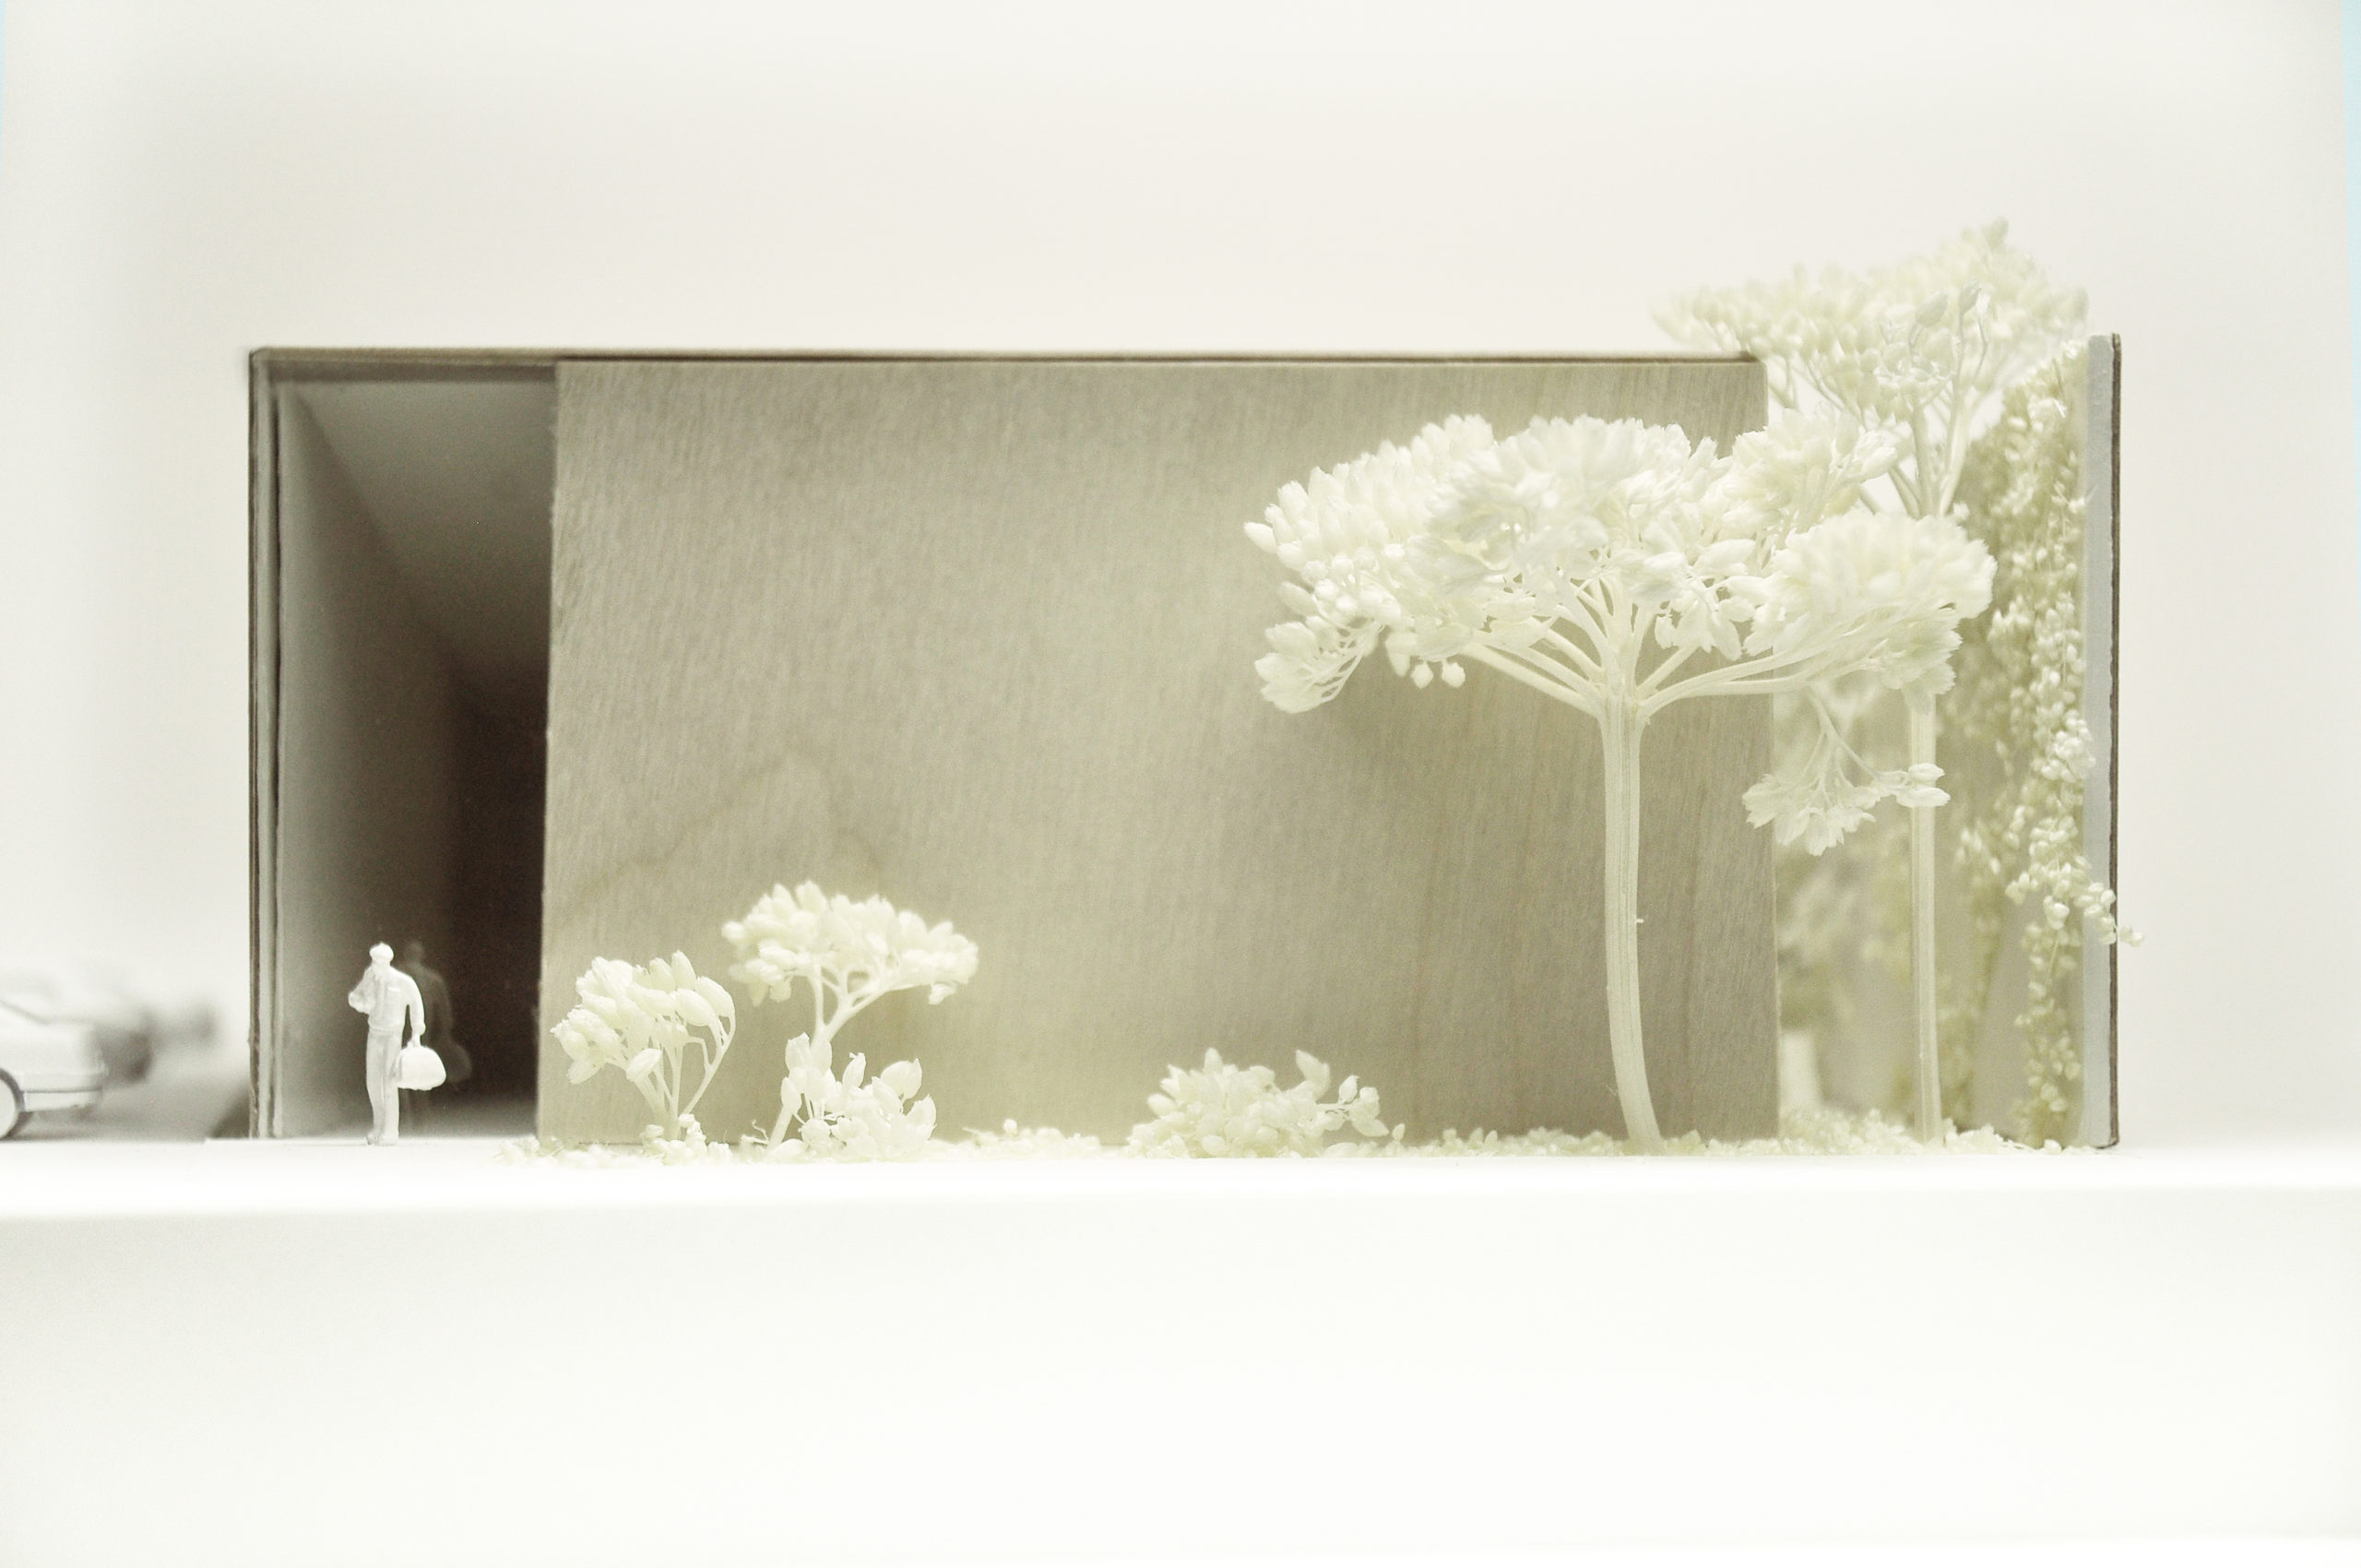 spatial practice architecture office Los Angeles Hong Kong fleur de sel restaurant taichung taiwan model service- entry